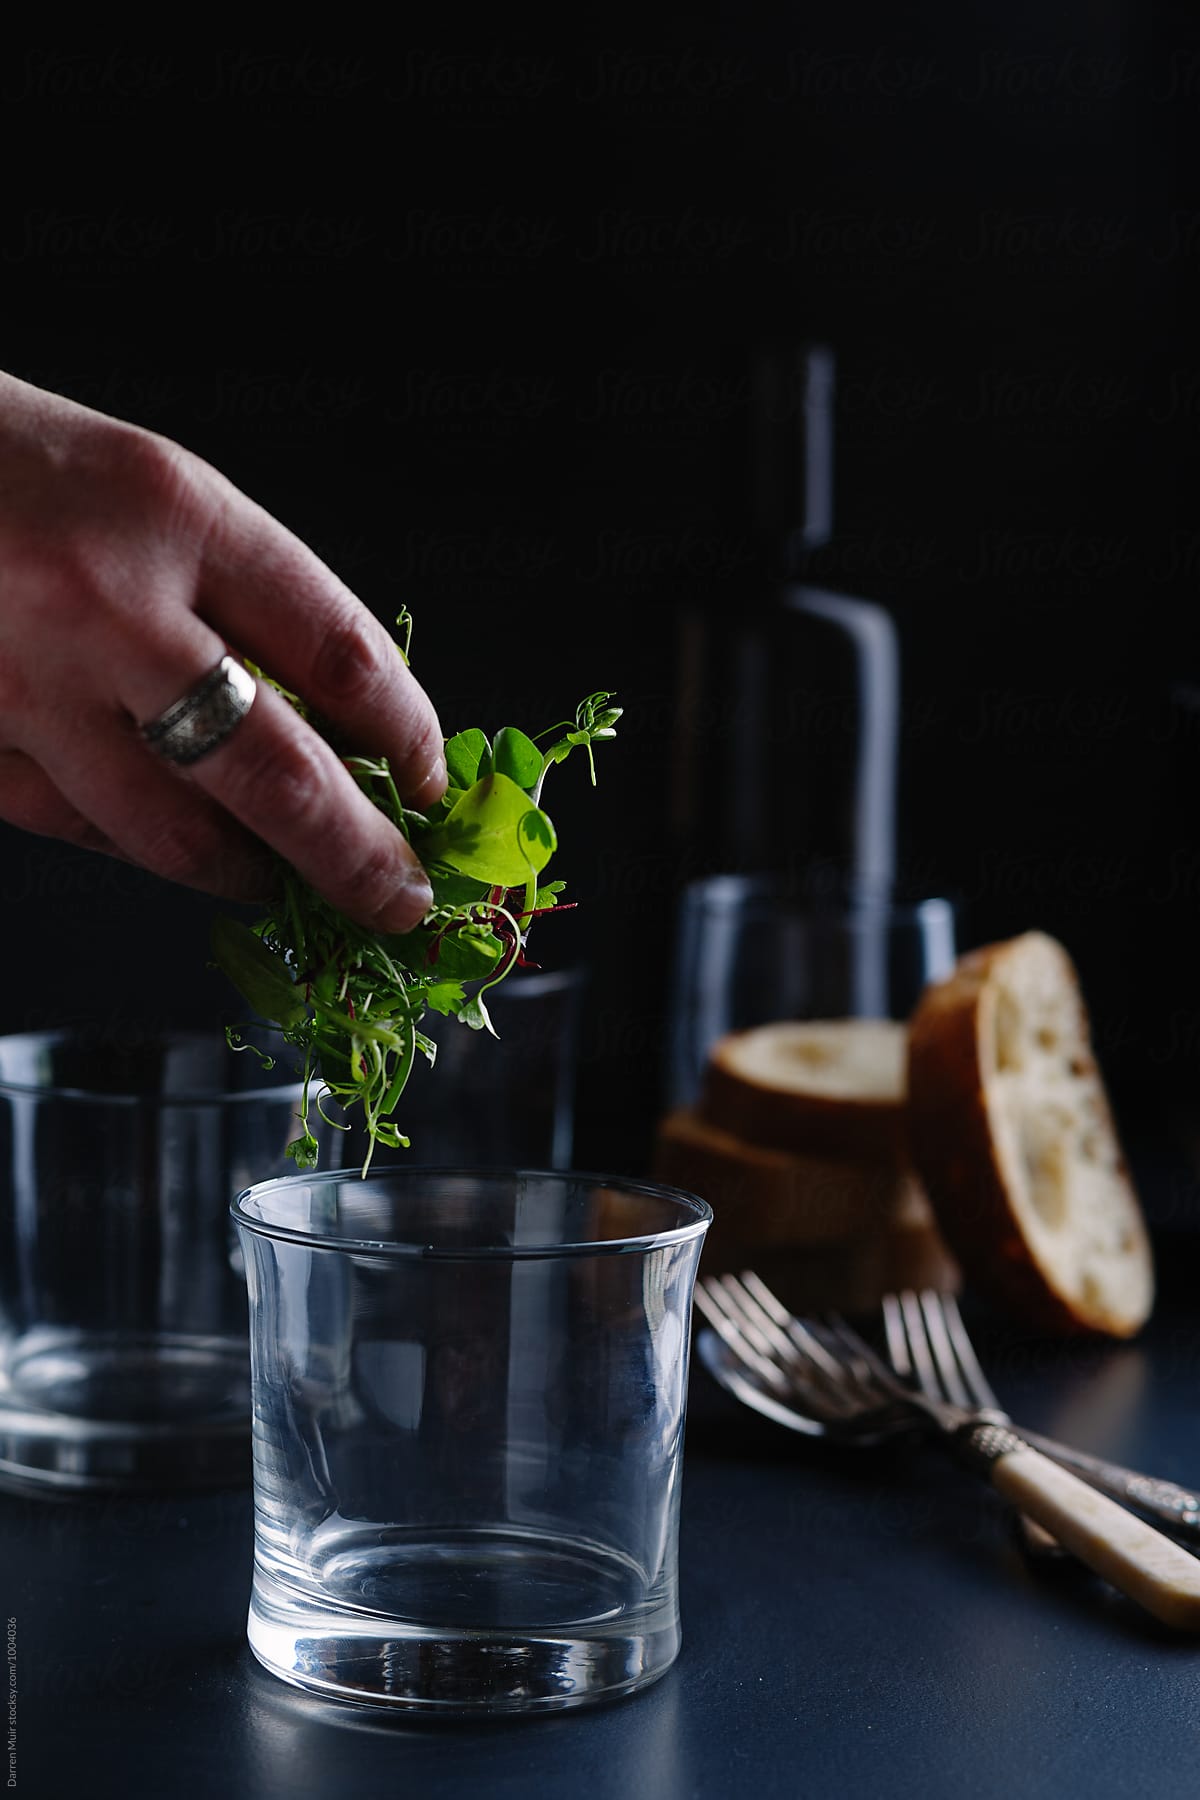 Micro herb salad leaf being put into a glass.